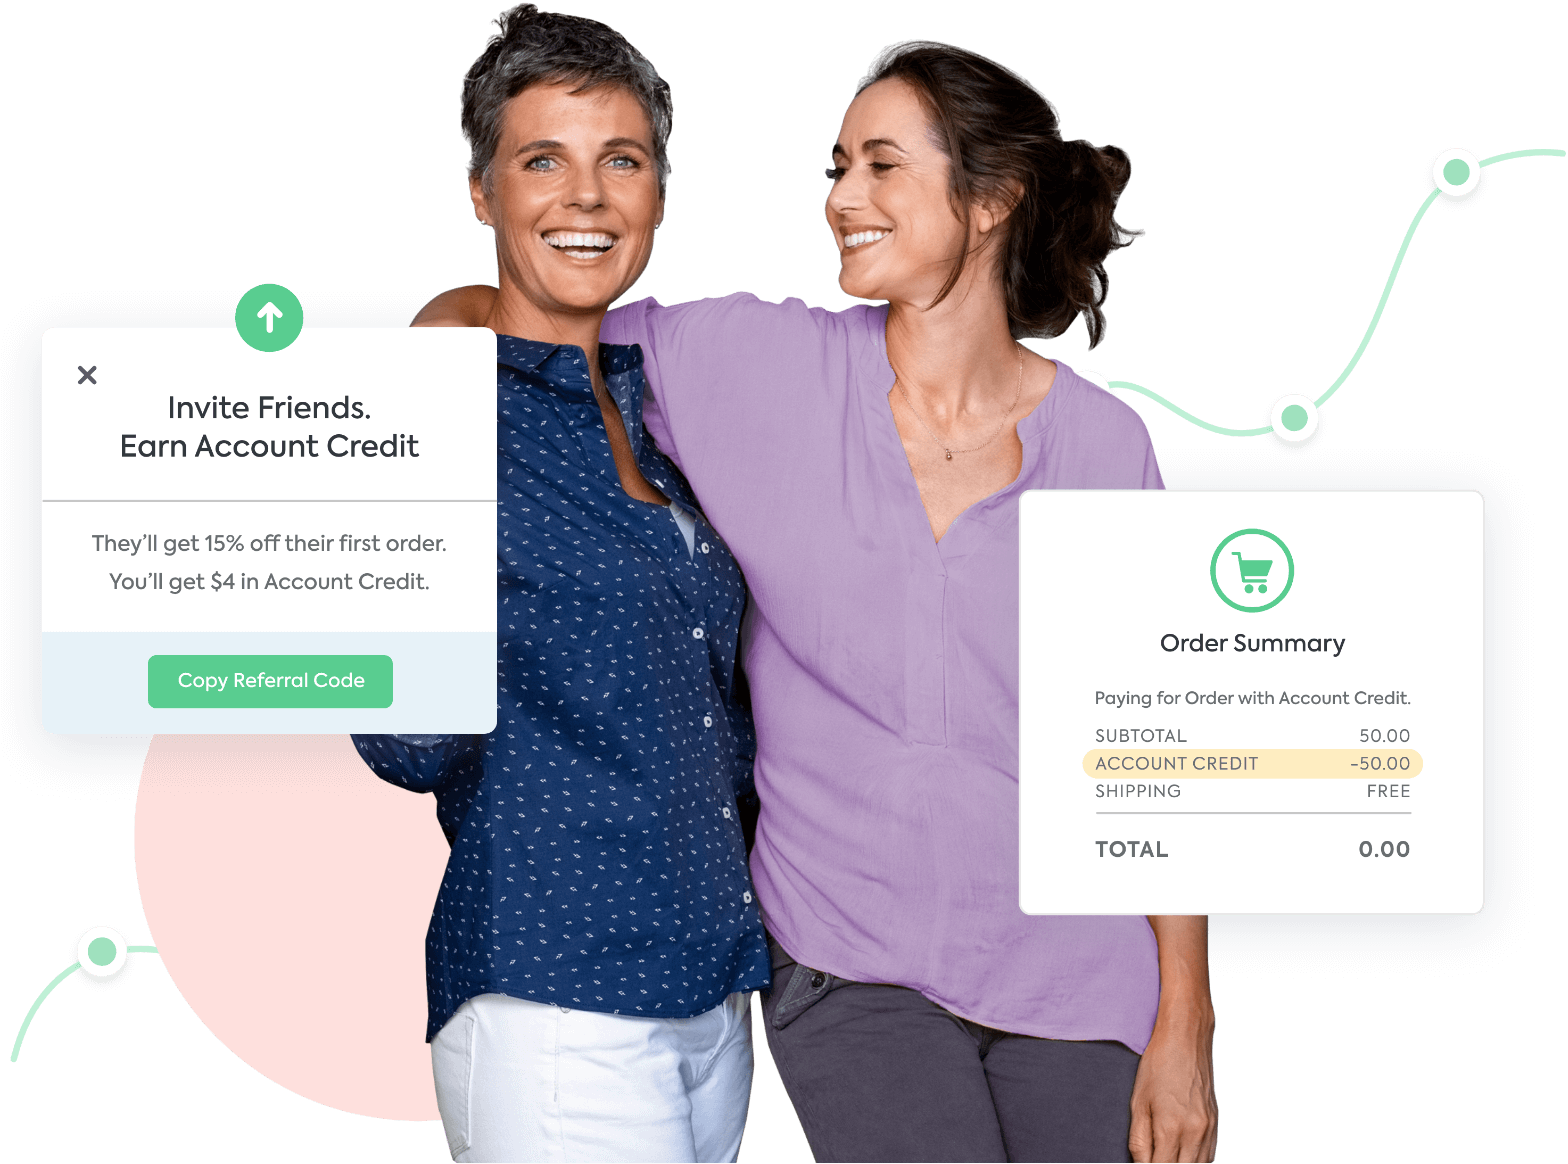 Two friends laughing with an invite code for referrals and a checkout screen using account credit.